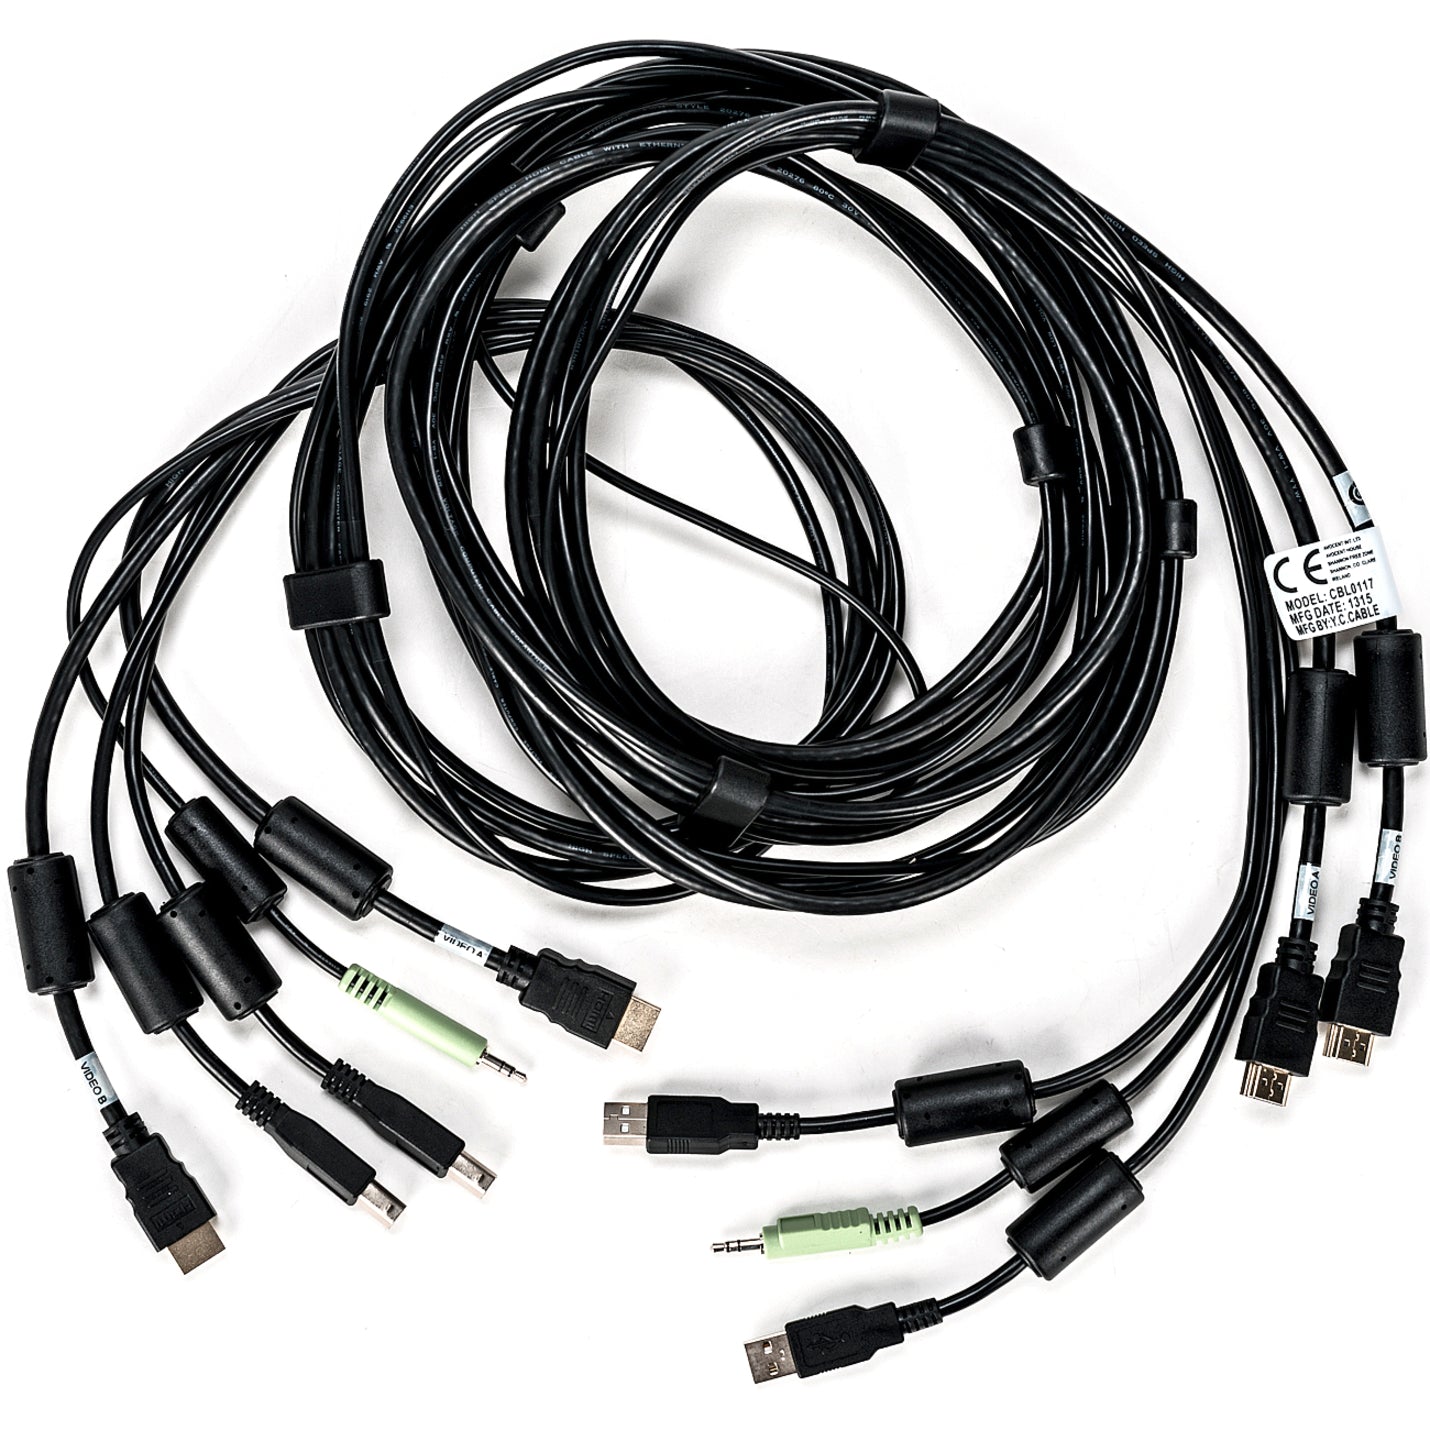 AVOCENT CBL0117 KVM Cable, Dual HDMI and Audio, 10 ft. for Vertiv Avocent SV and SC Series Switches